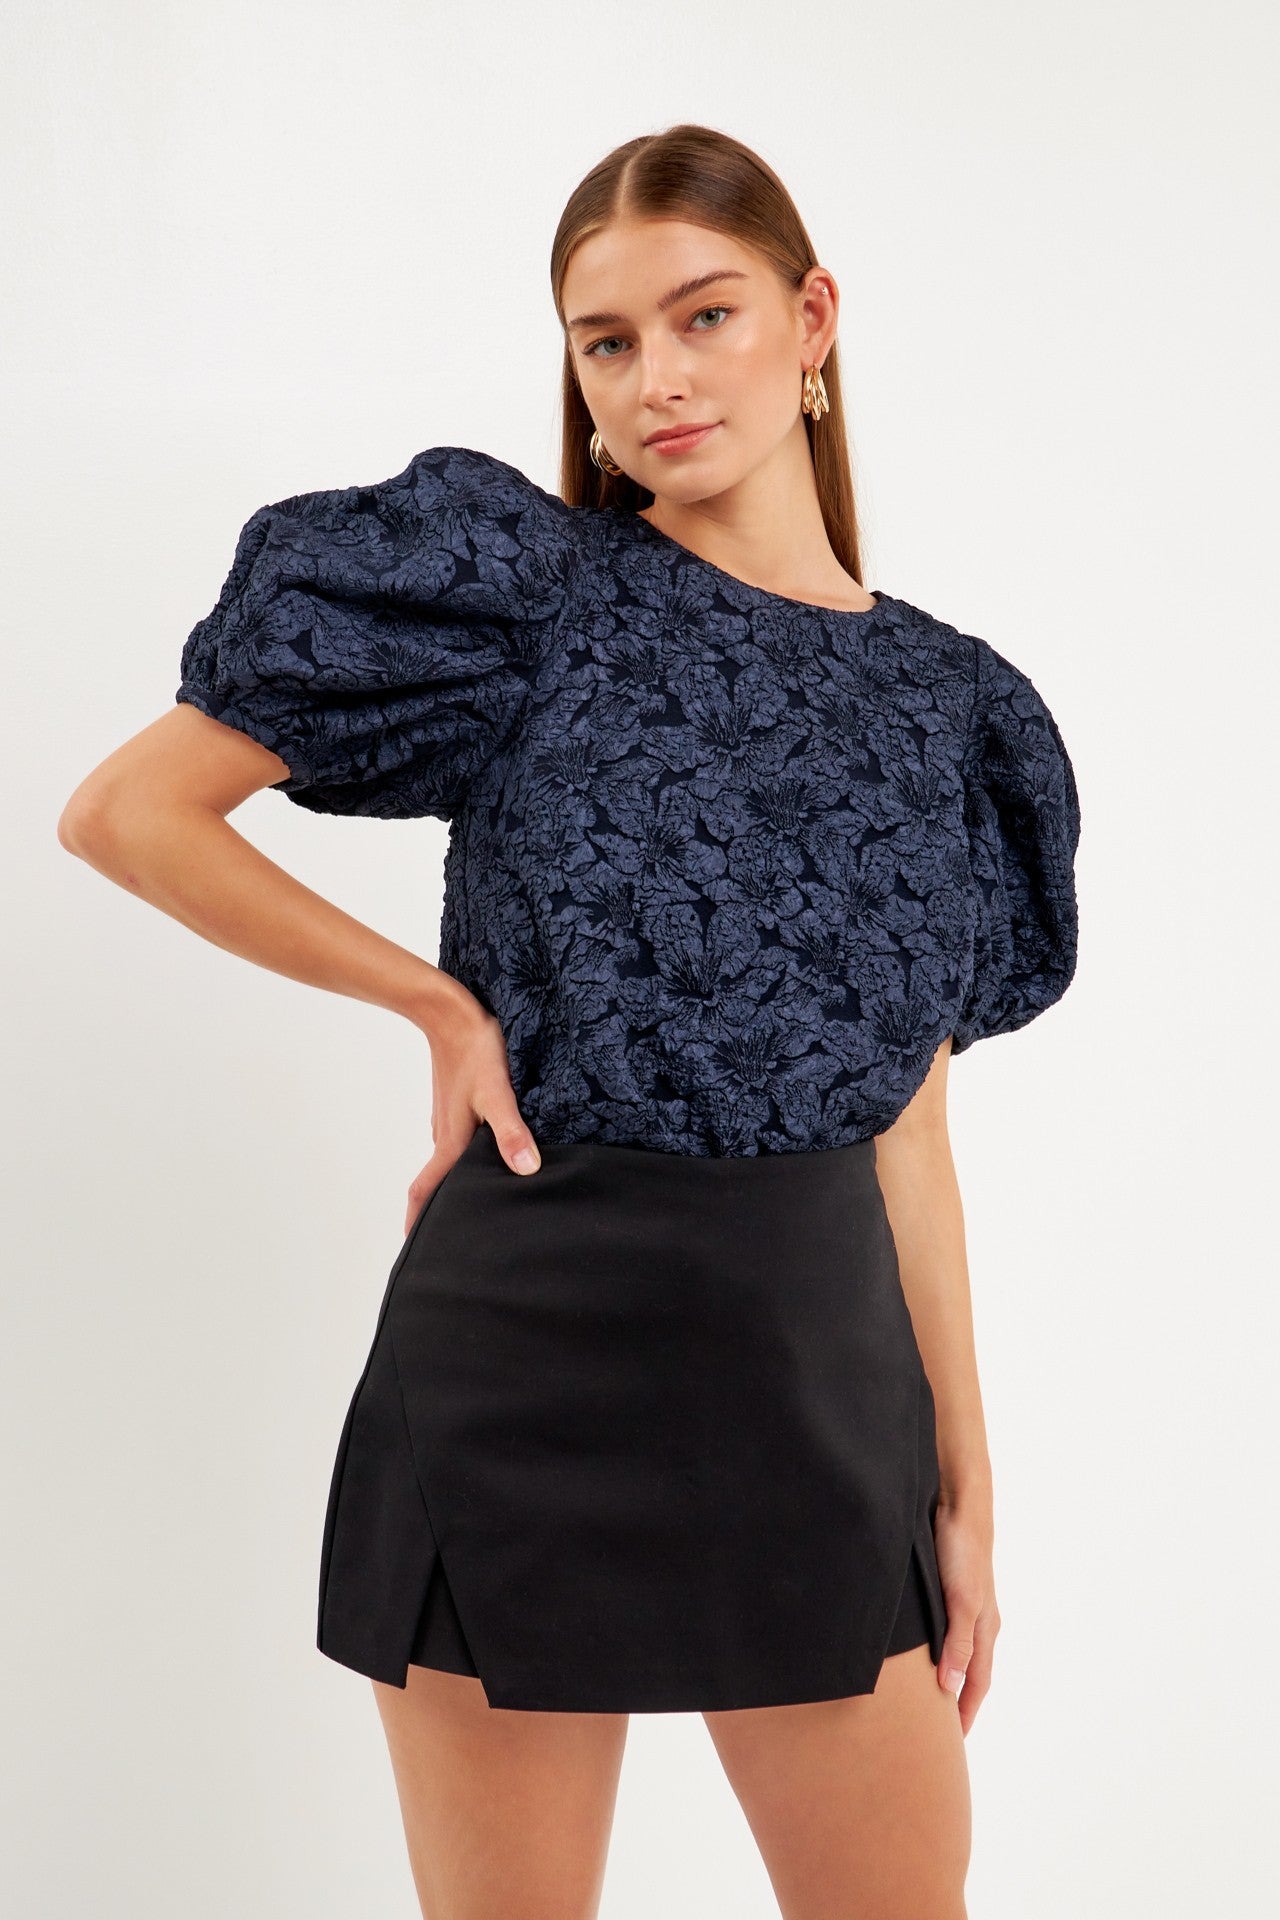 Apparel- Endless Rose Texture Fabric Top with Puff Short Sleeves